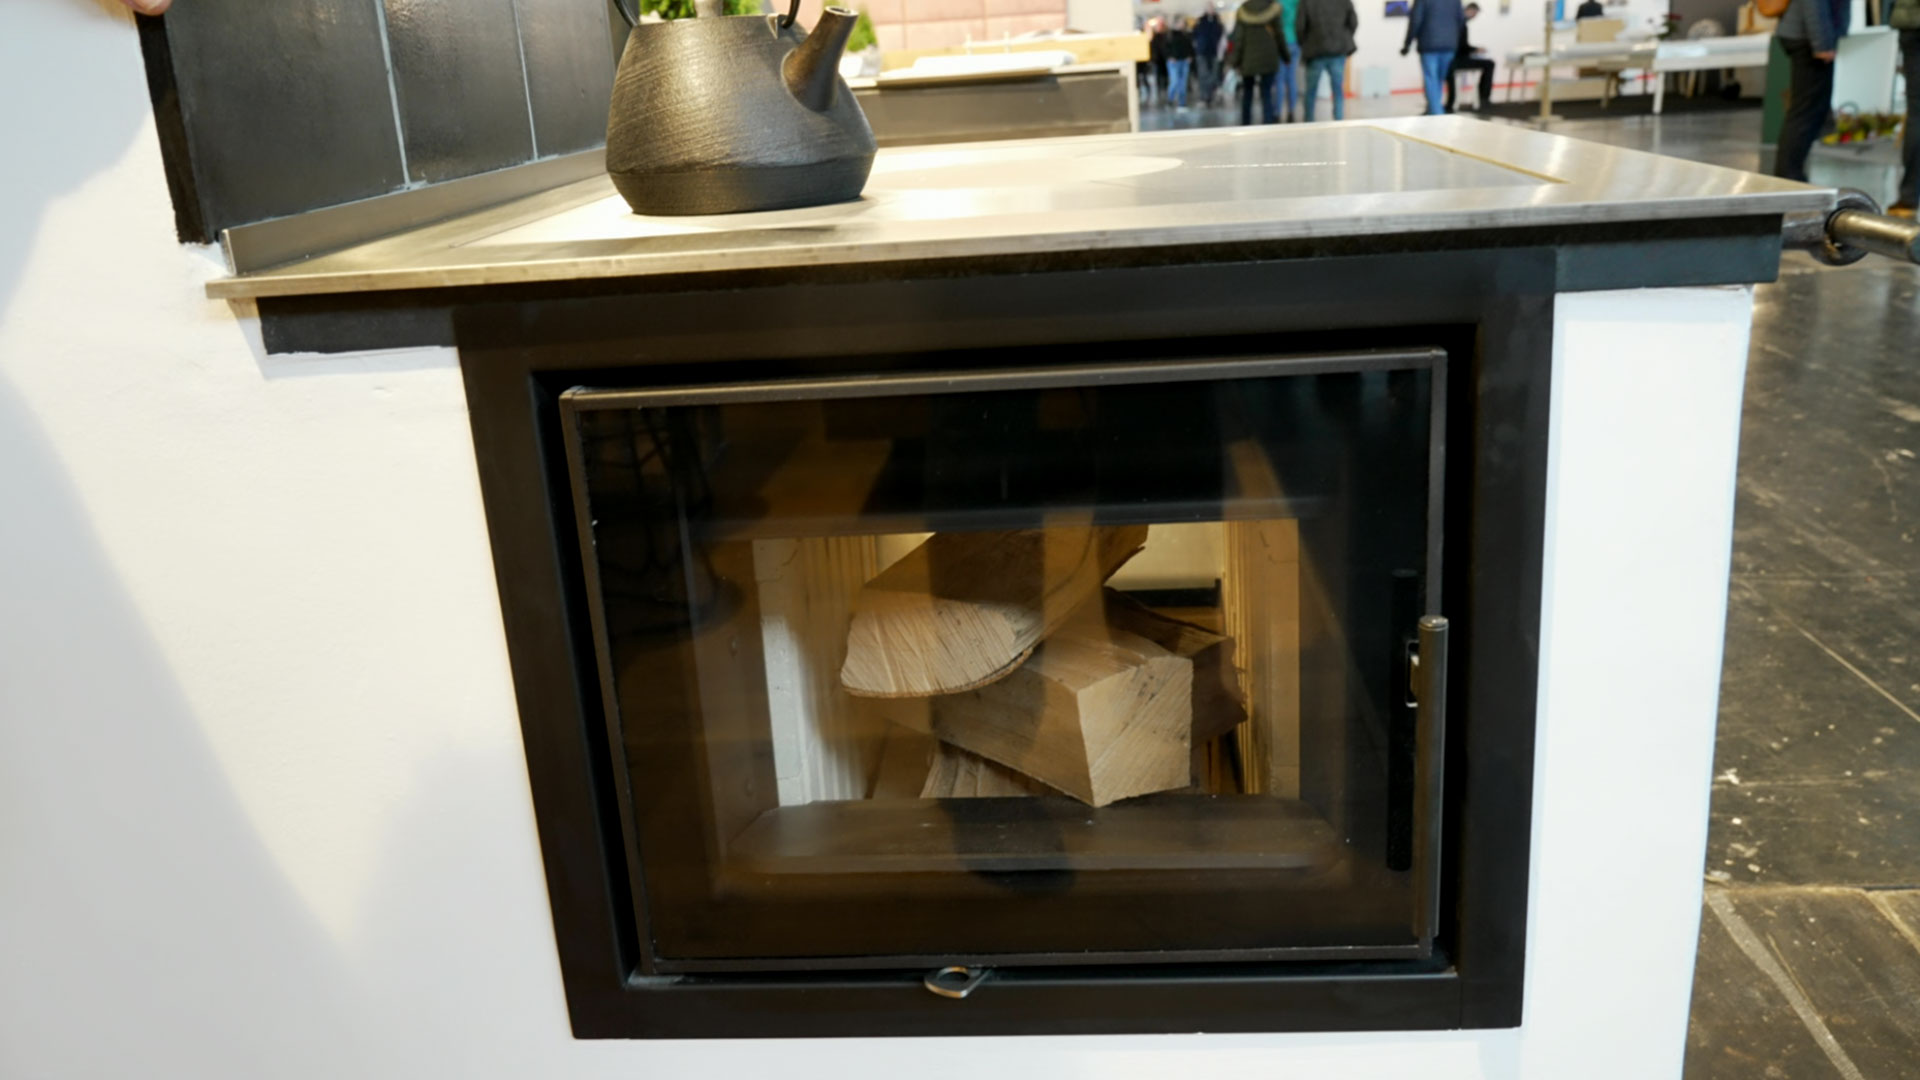 Cooking with a tiled stove